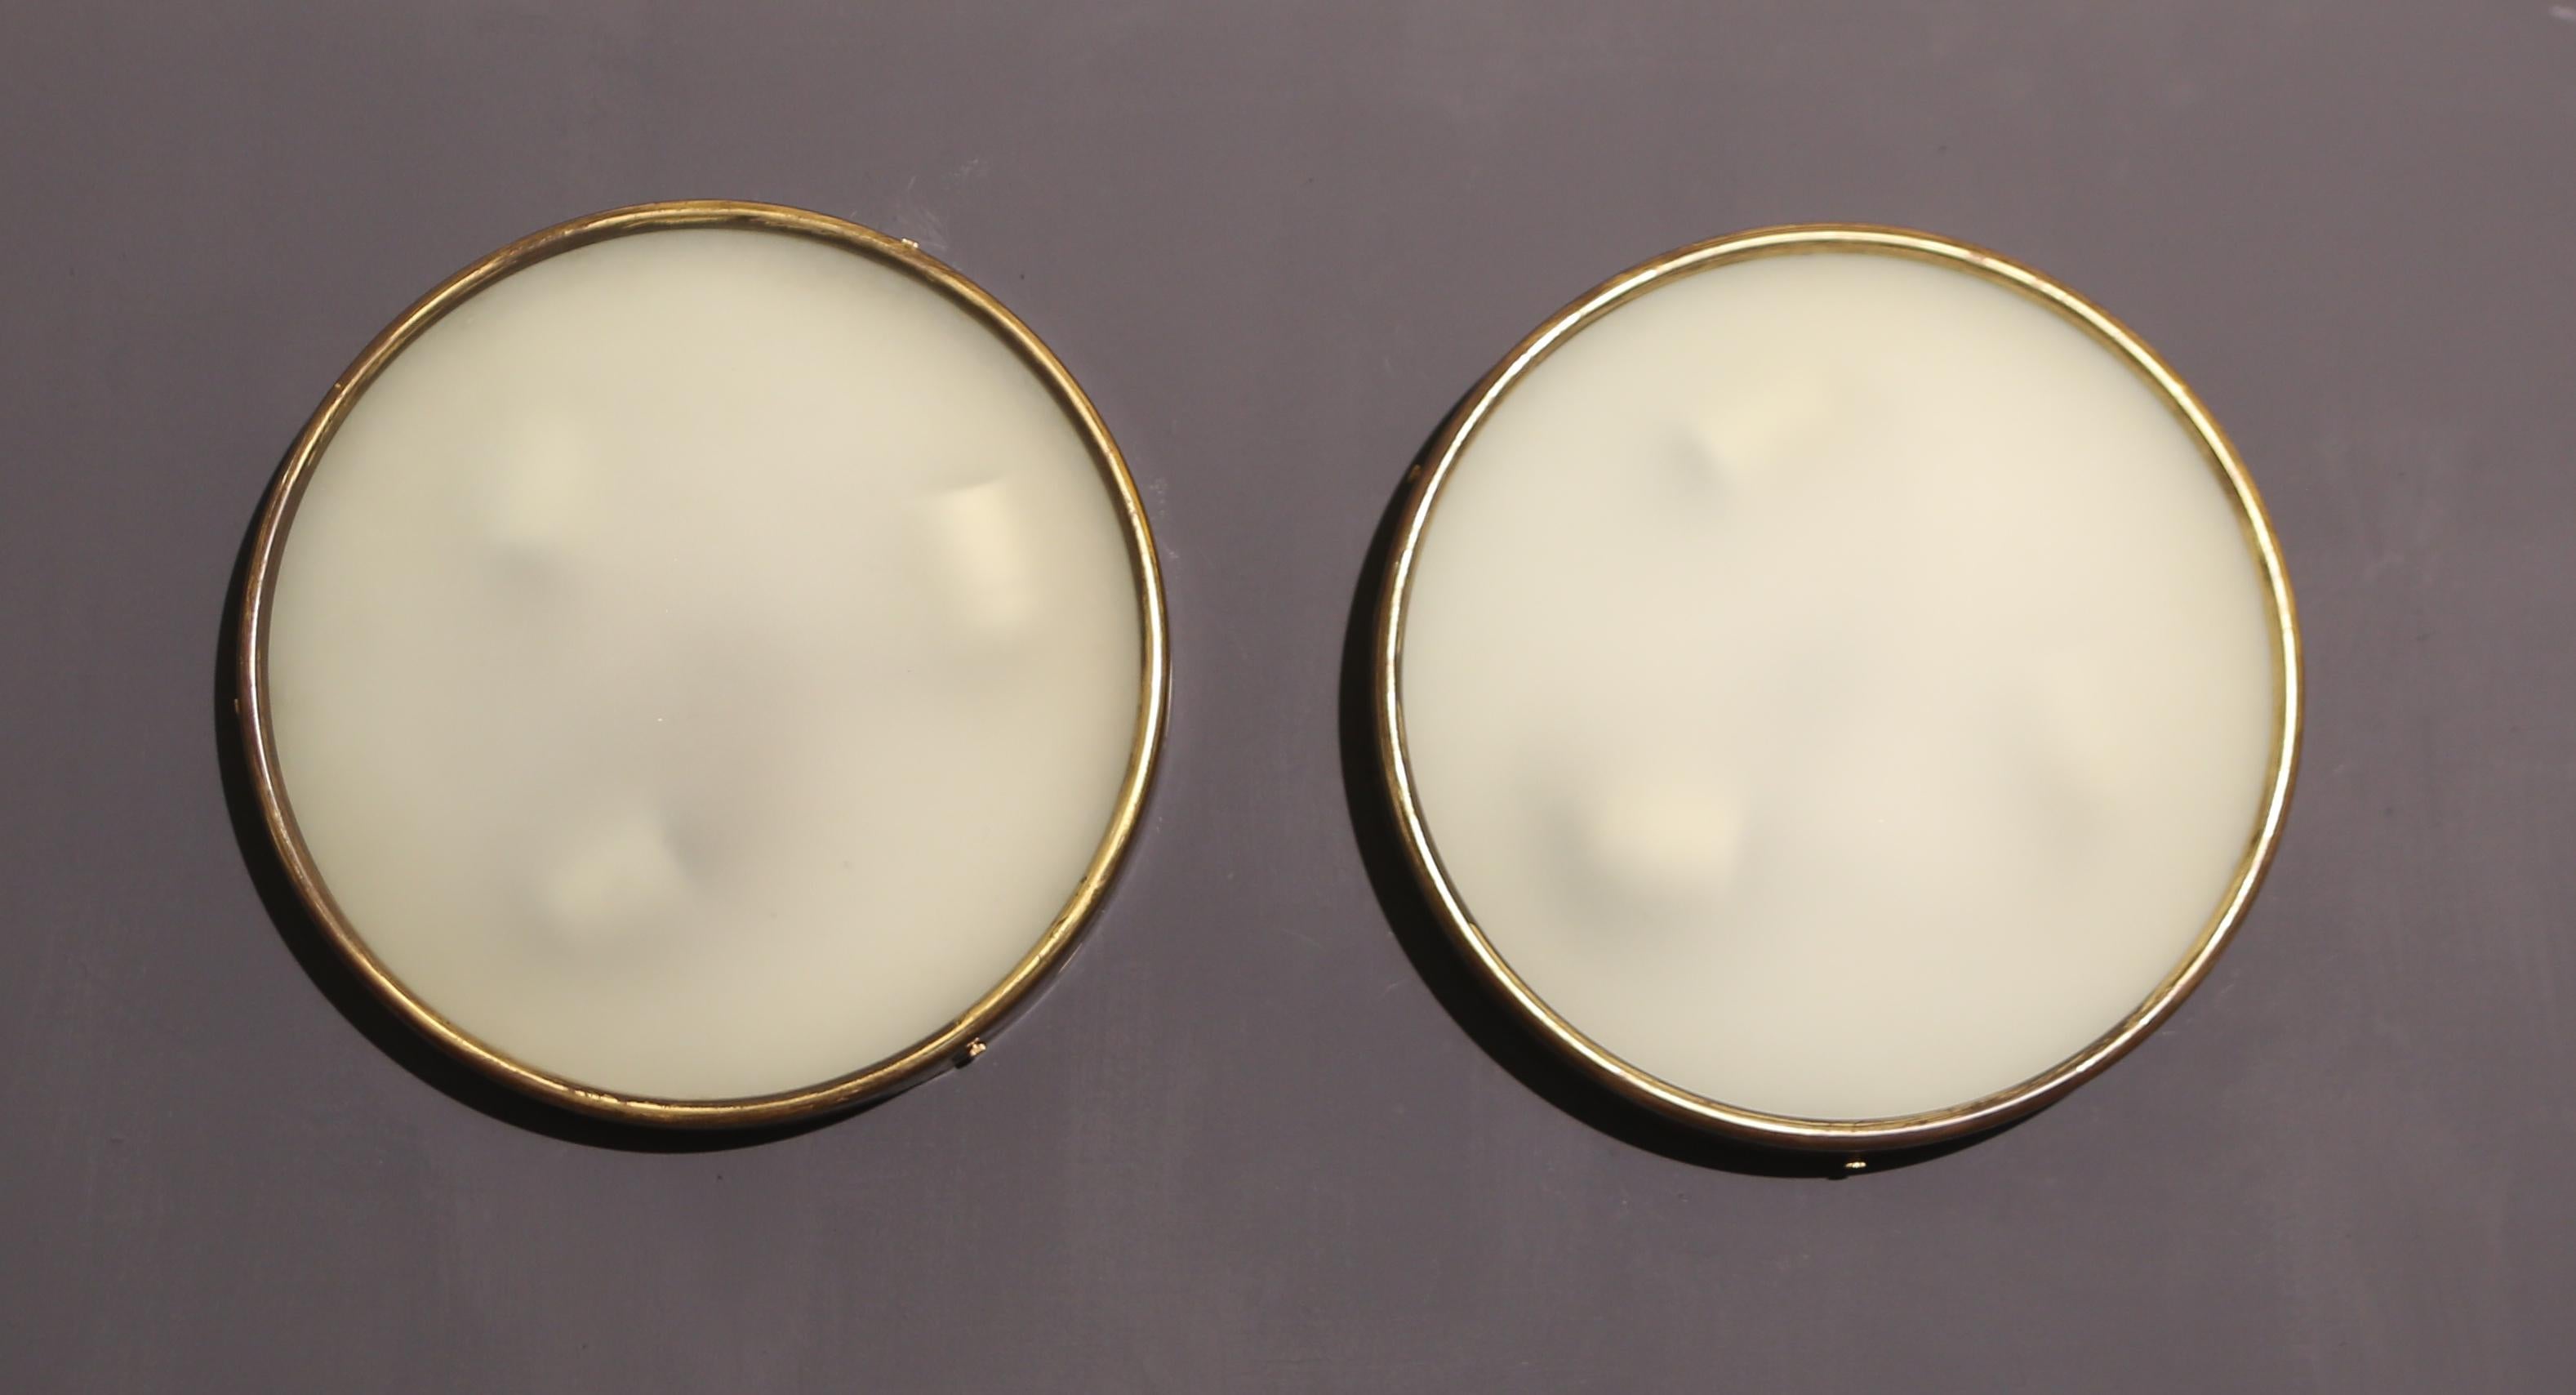 Other Gino Sarfatti rare set of ceiling lights  made for the Milanese residence